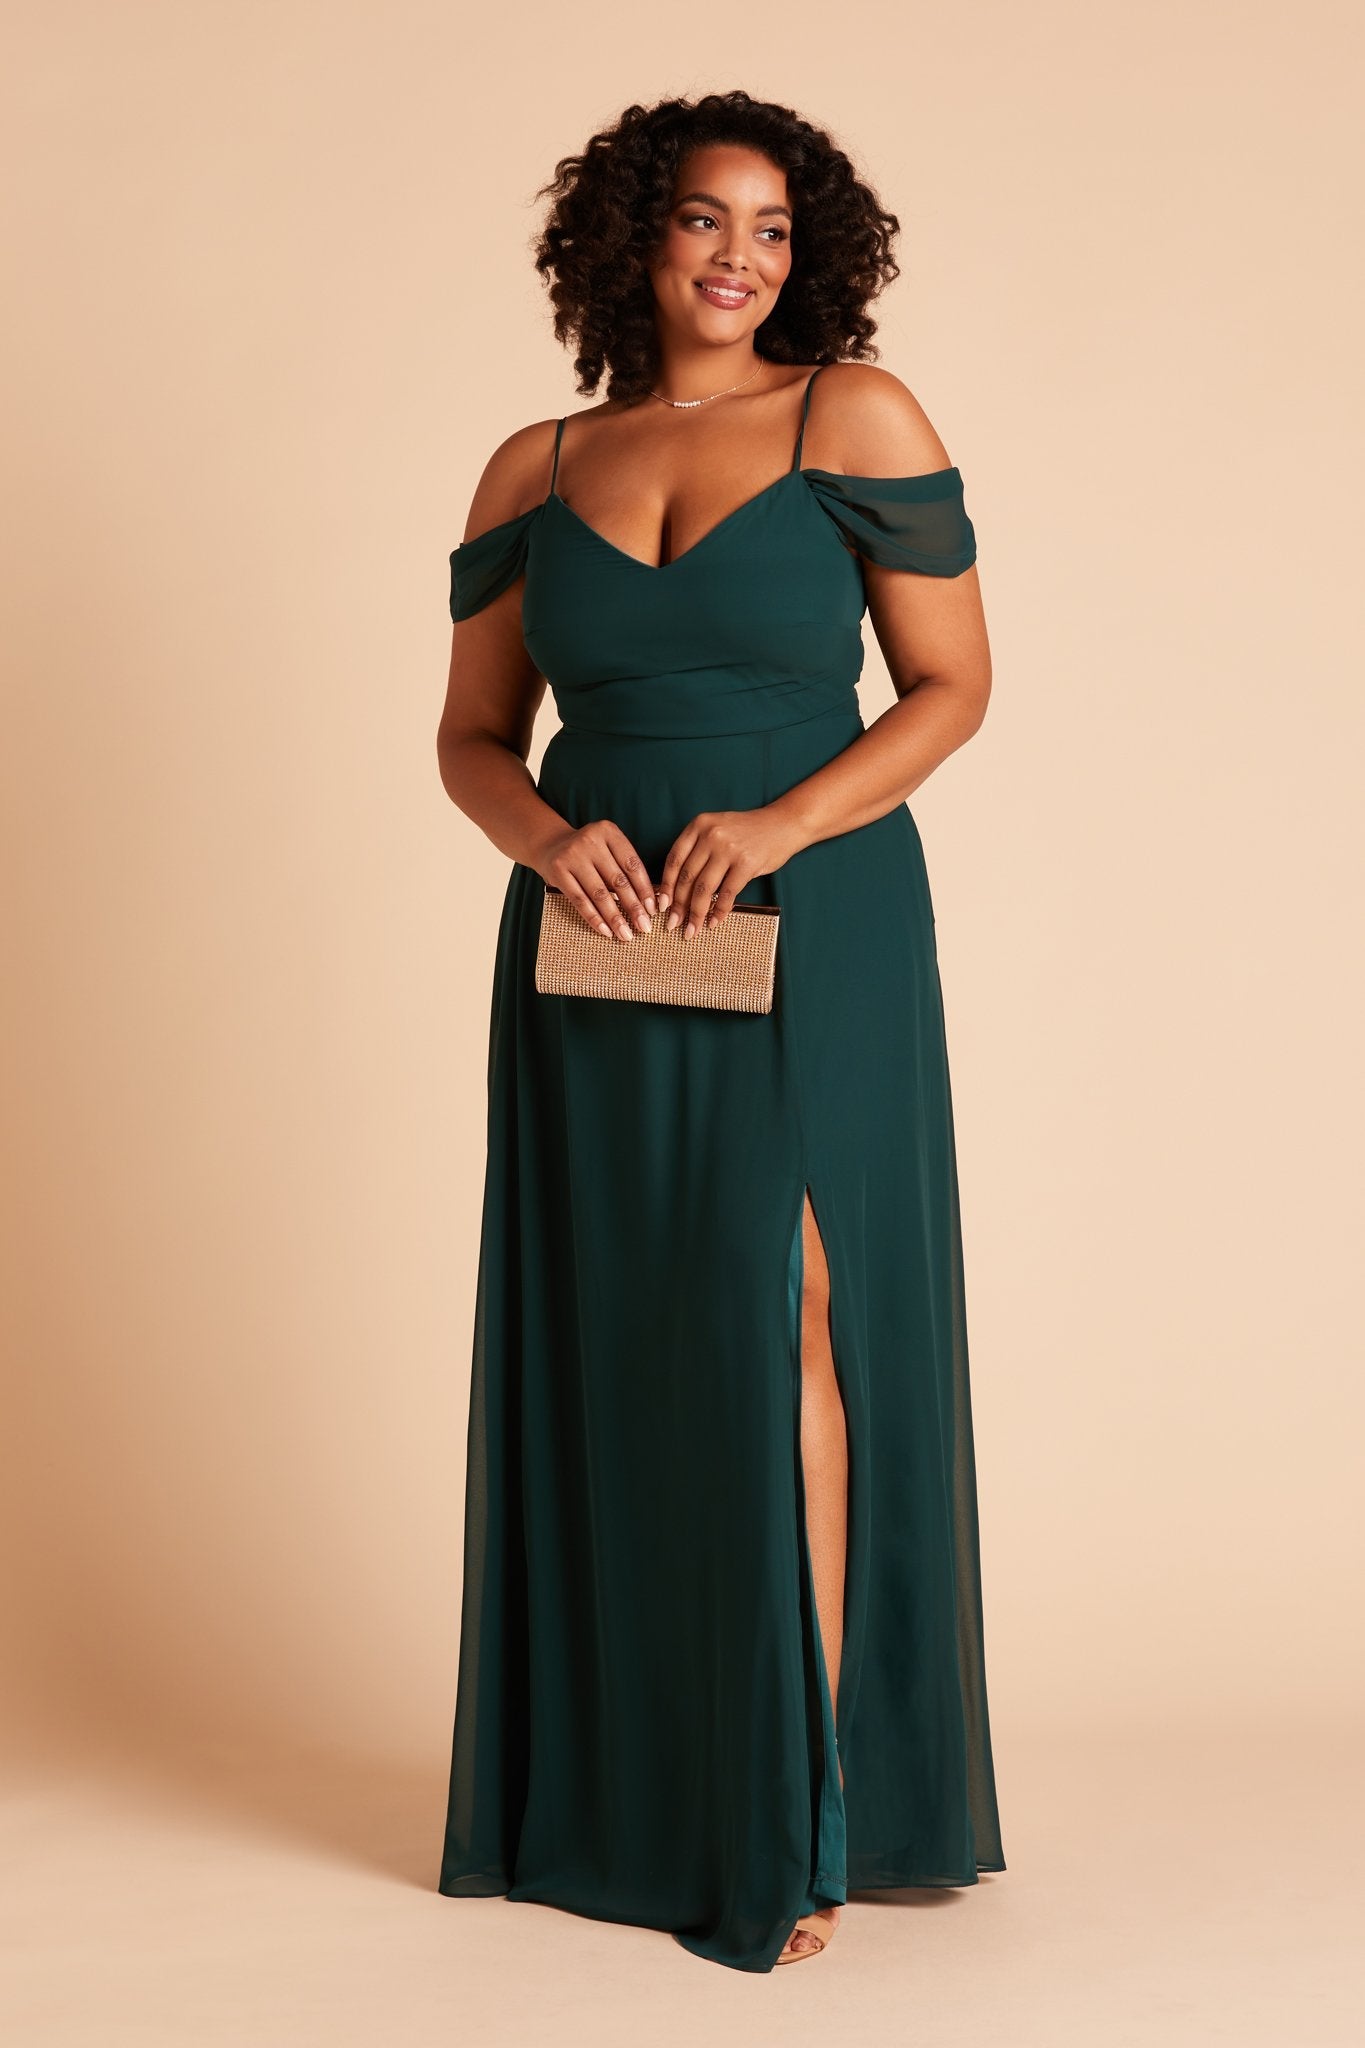 Front view of the floor-length Devin Convertible Plus Size Bridesmaid Dress in emerald chiffon by Birdy Grey with a V-neck front and draping detachable sleeves. The flowing skirt features a slit over the left leg.